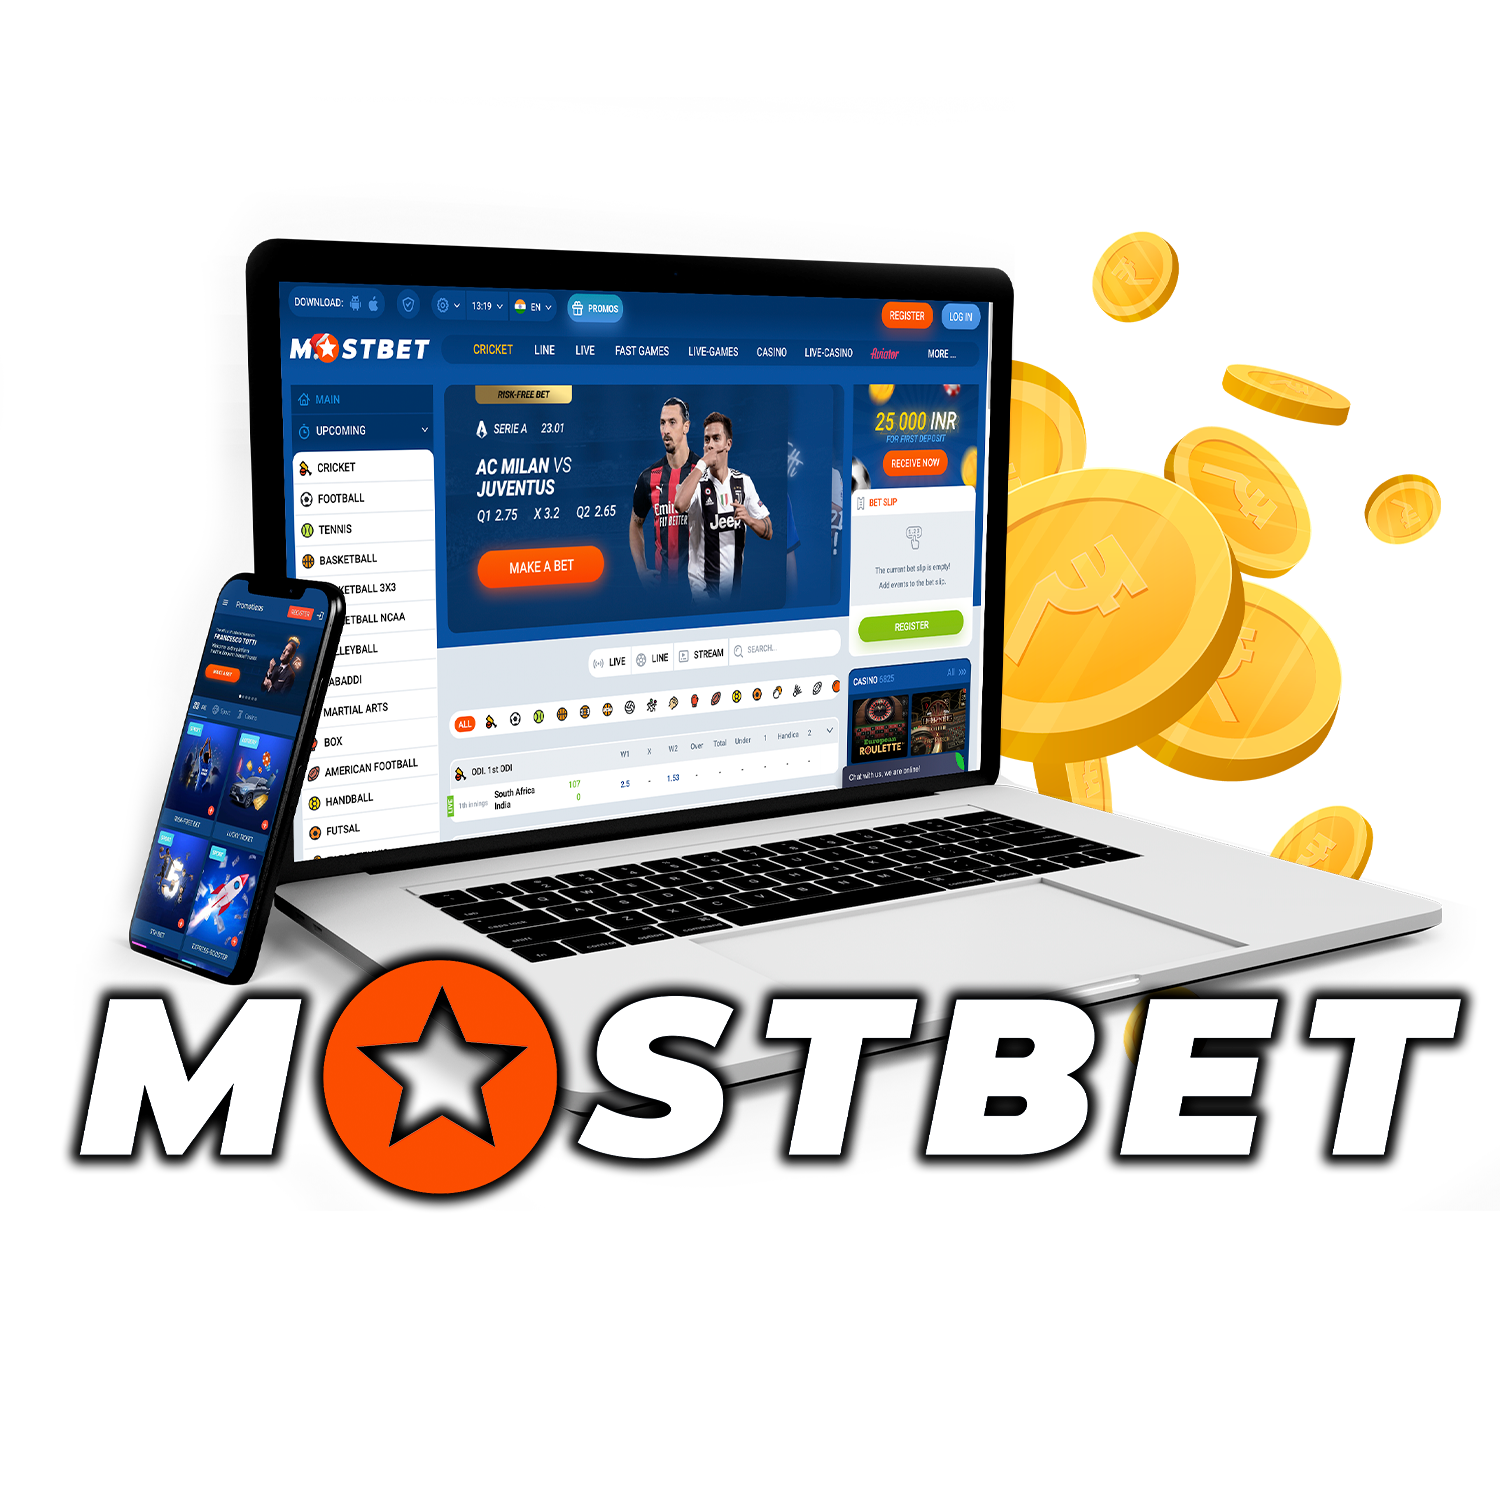 Warning: These 9 Mistakes Will Destroy Your Mostbet: Best Online Casino in Bangladesh